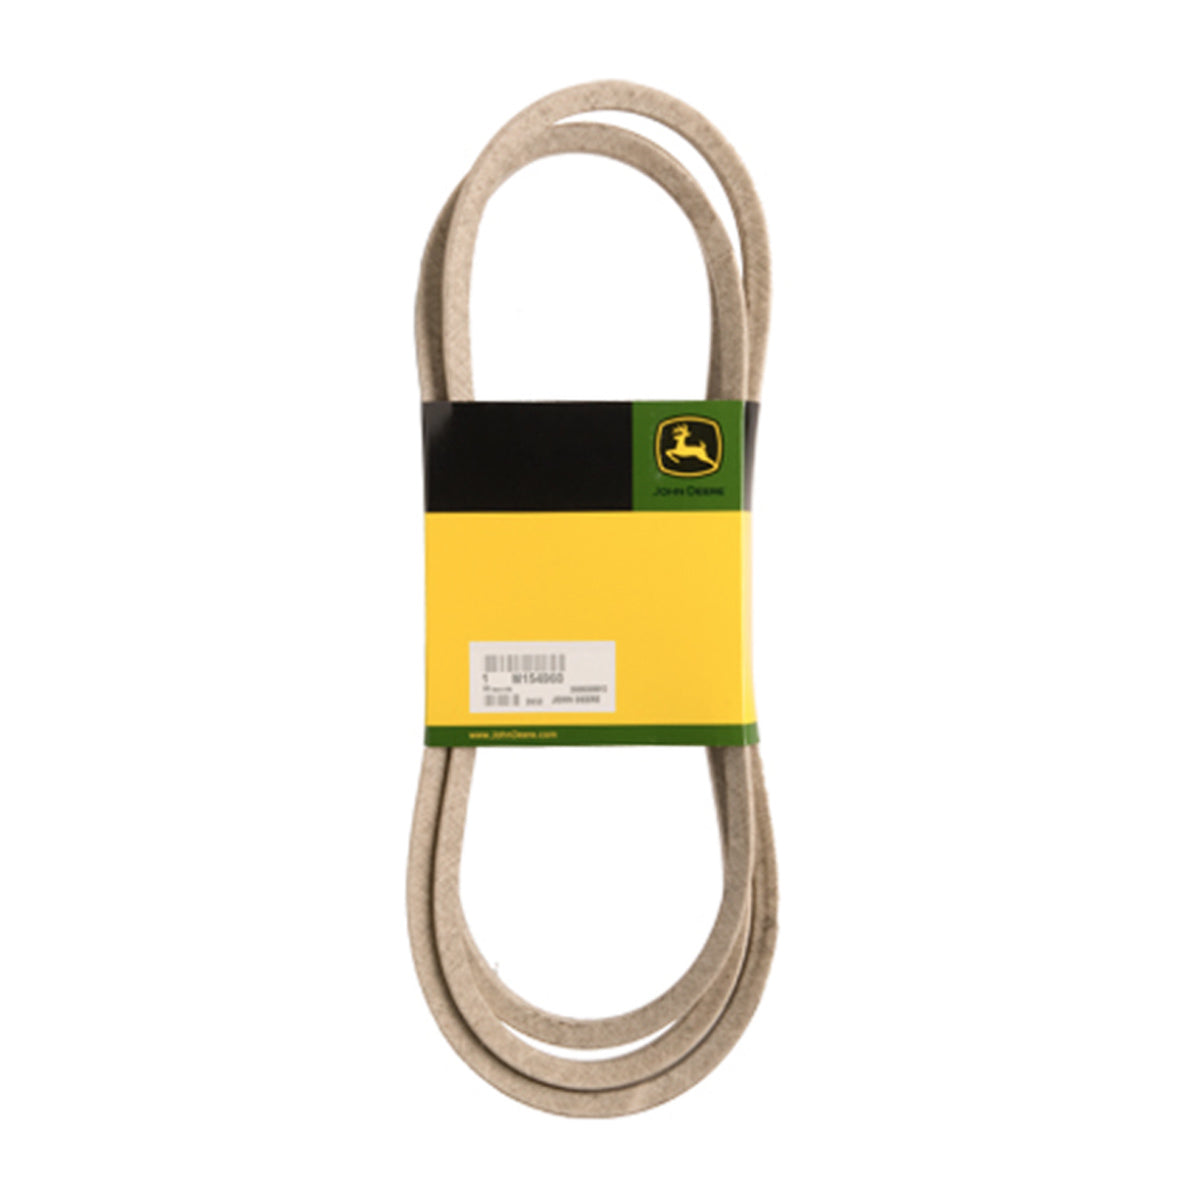 John Deere Secondary Deck Drive Belt for GT, GX, LX & Select Series with 54" Deck - M154960